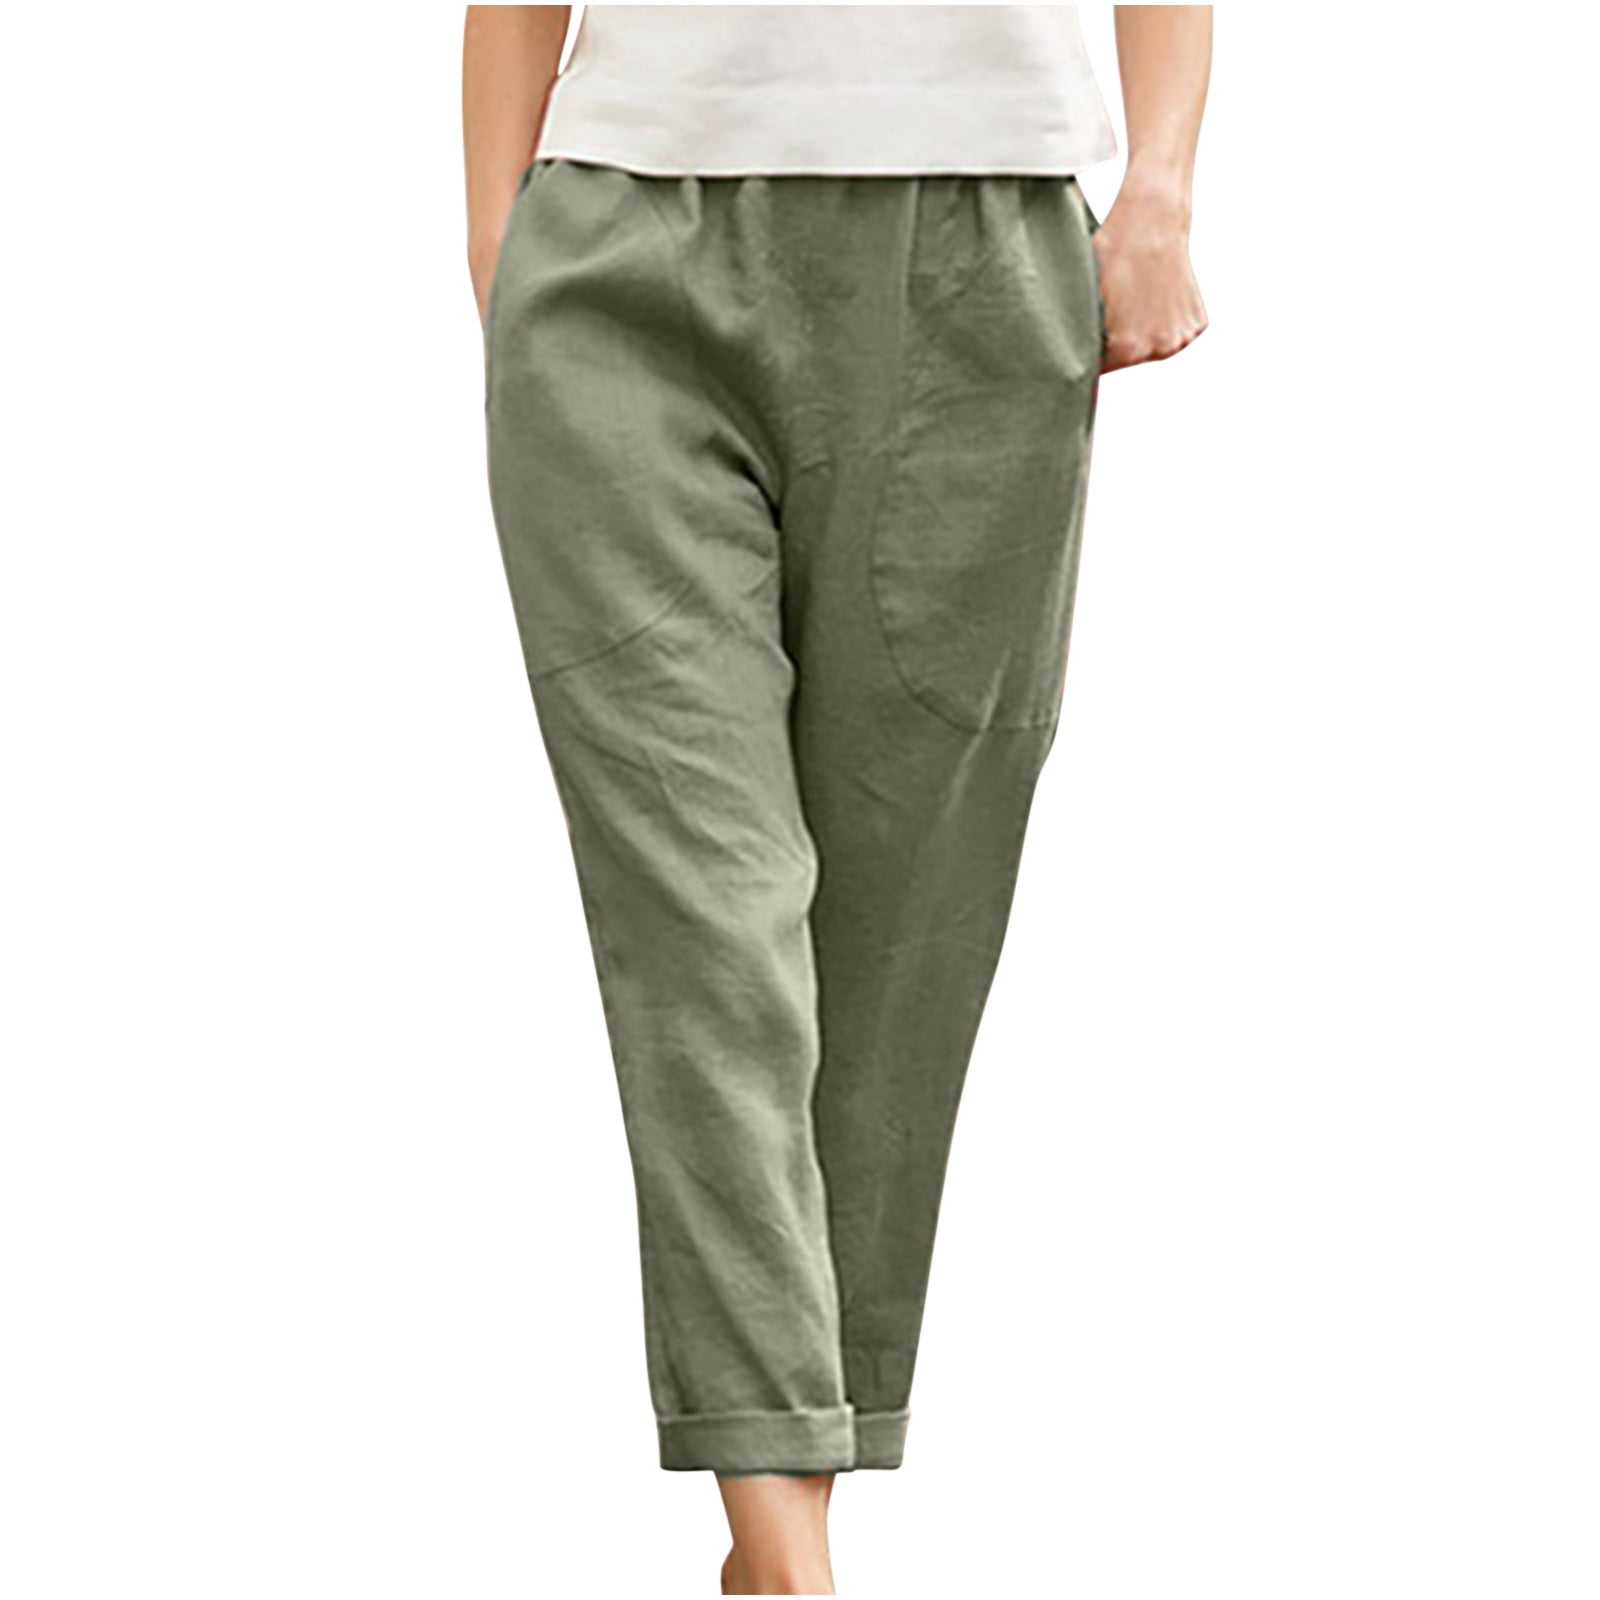 QUYUON Pants for Women Discount Casual Solid Color Pockets Buttons Elastic  Waist Comfortable Straight Pants Fishing Pants Long Pant Leg Length Dressy